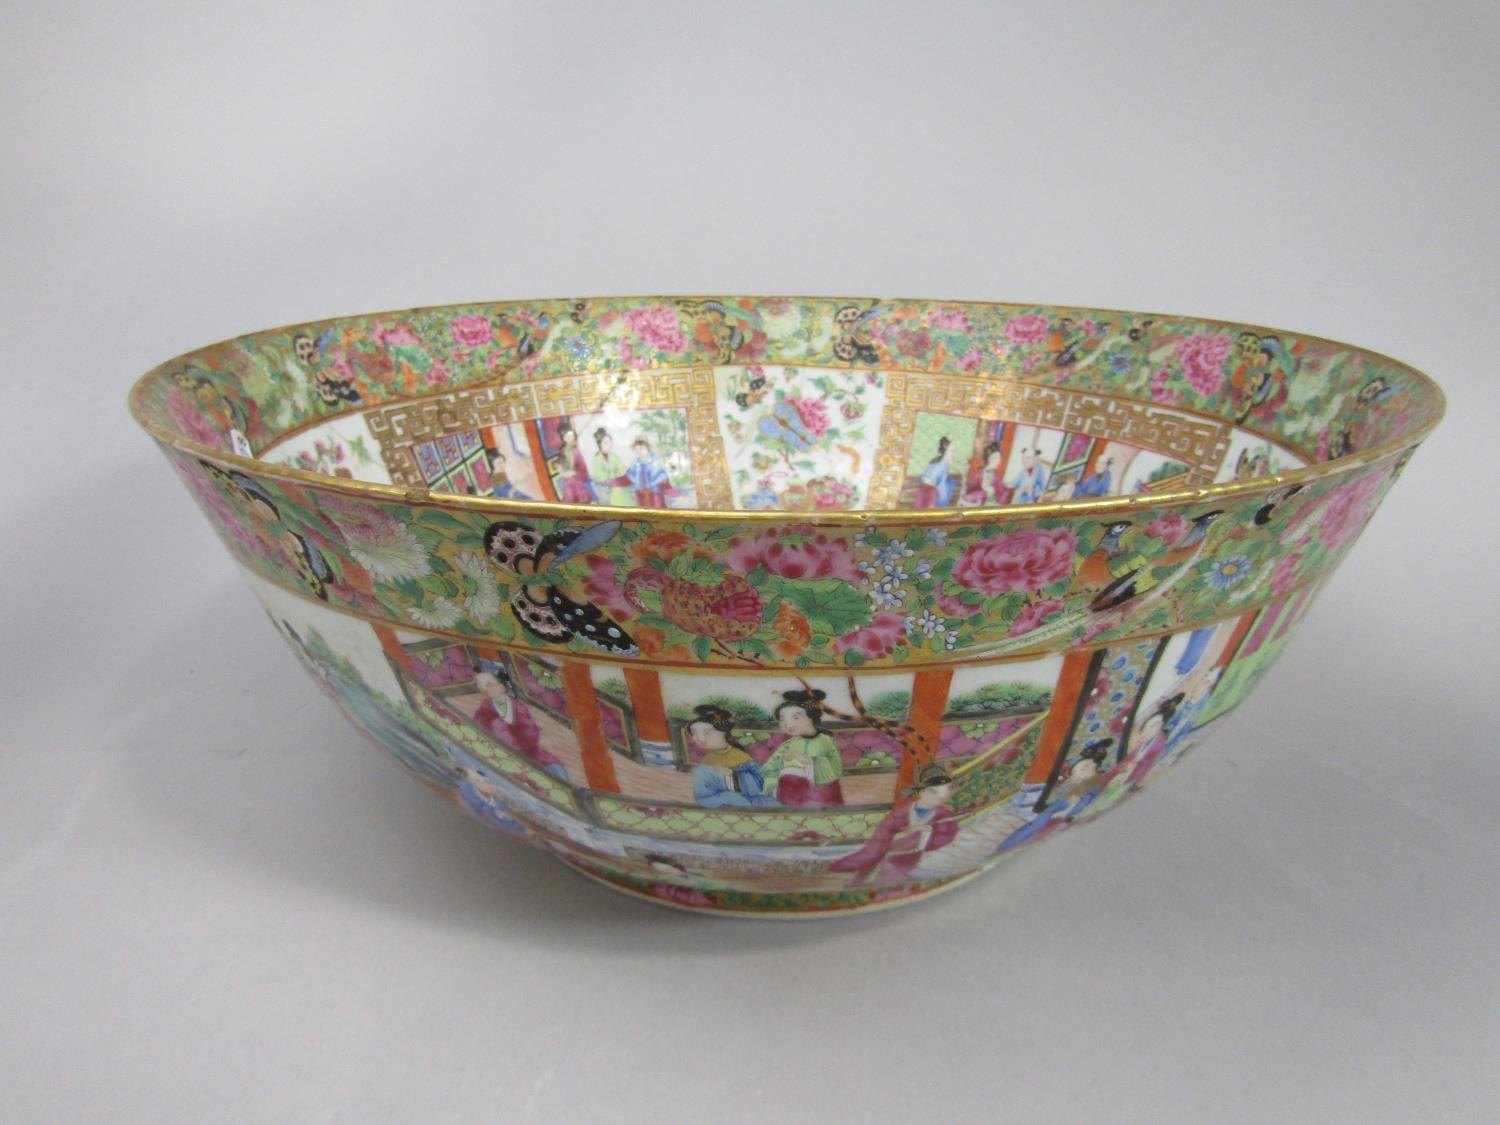 A 19th century Cantonese punch bowl with polychrome painted continuous decoration to the exterior - Image 2 of 2